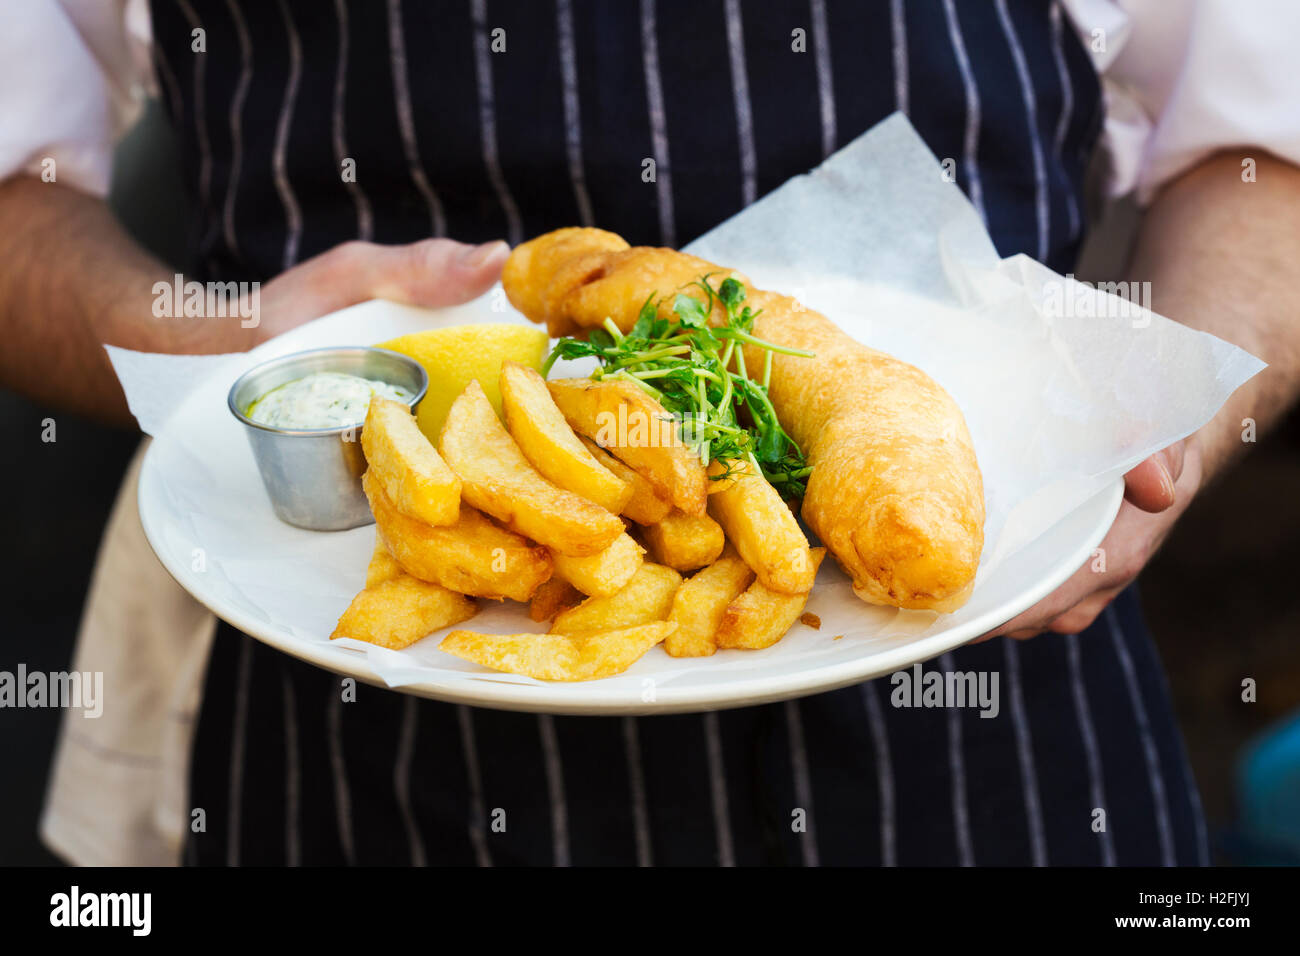 A cooked meal, a dish of fish and chips with garnish and tartare sauce. Stock Photo